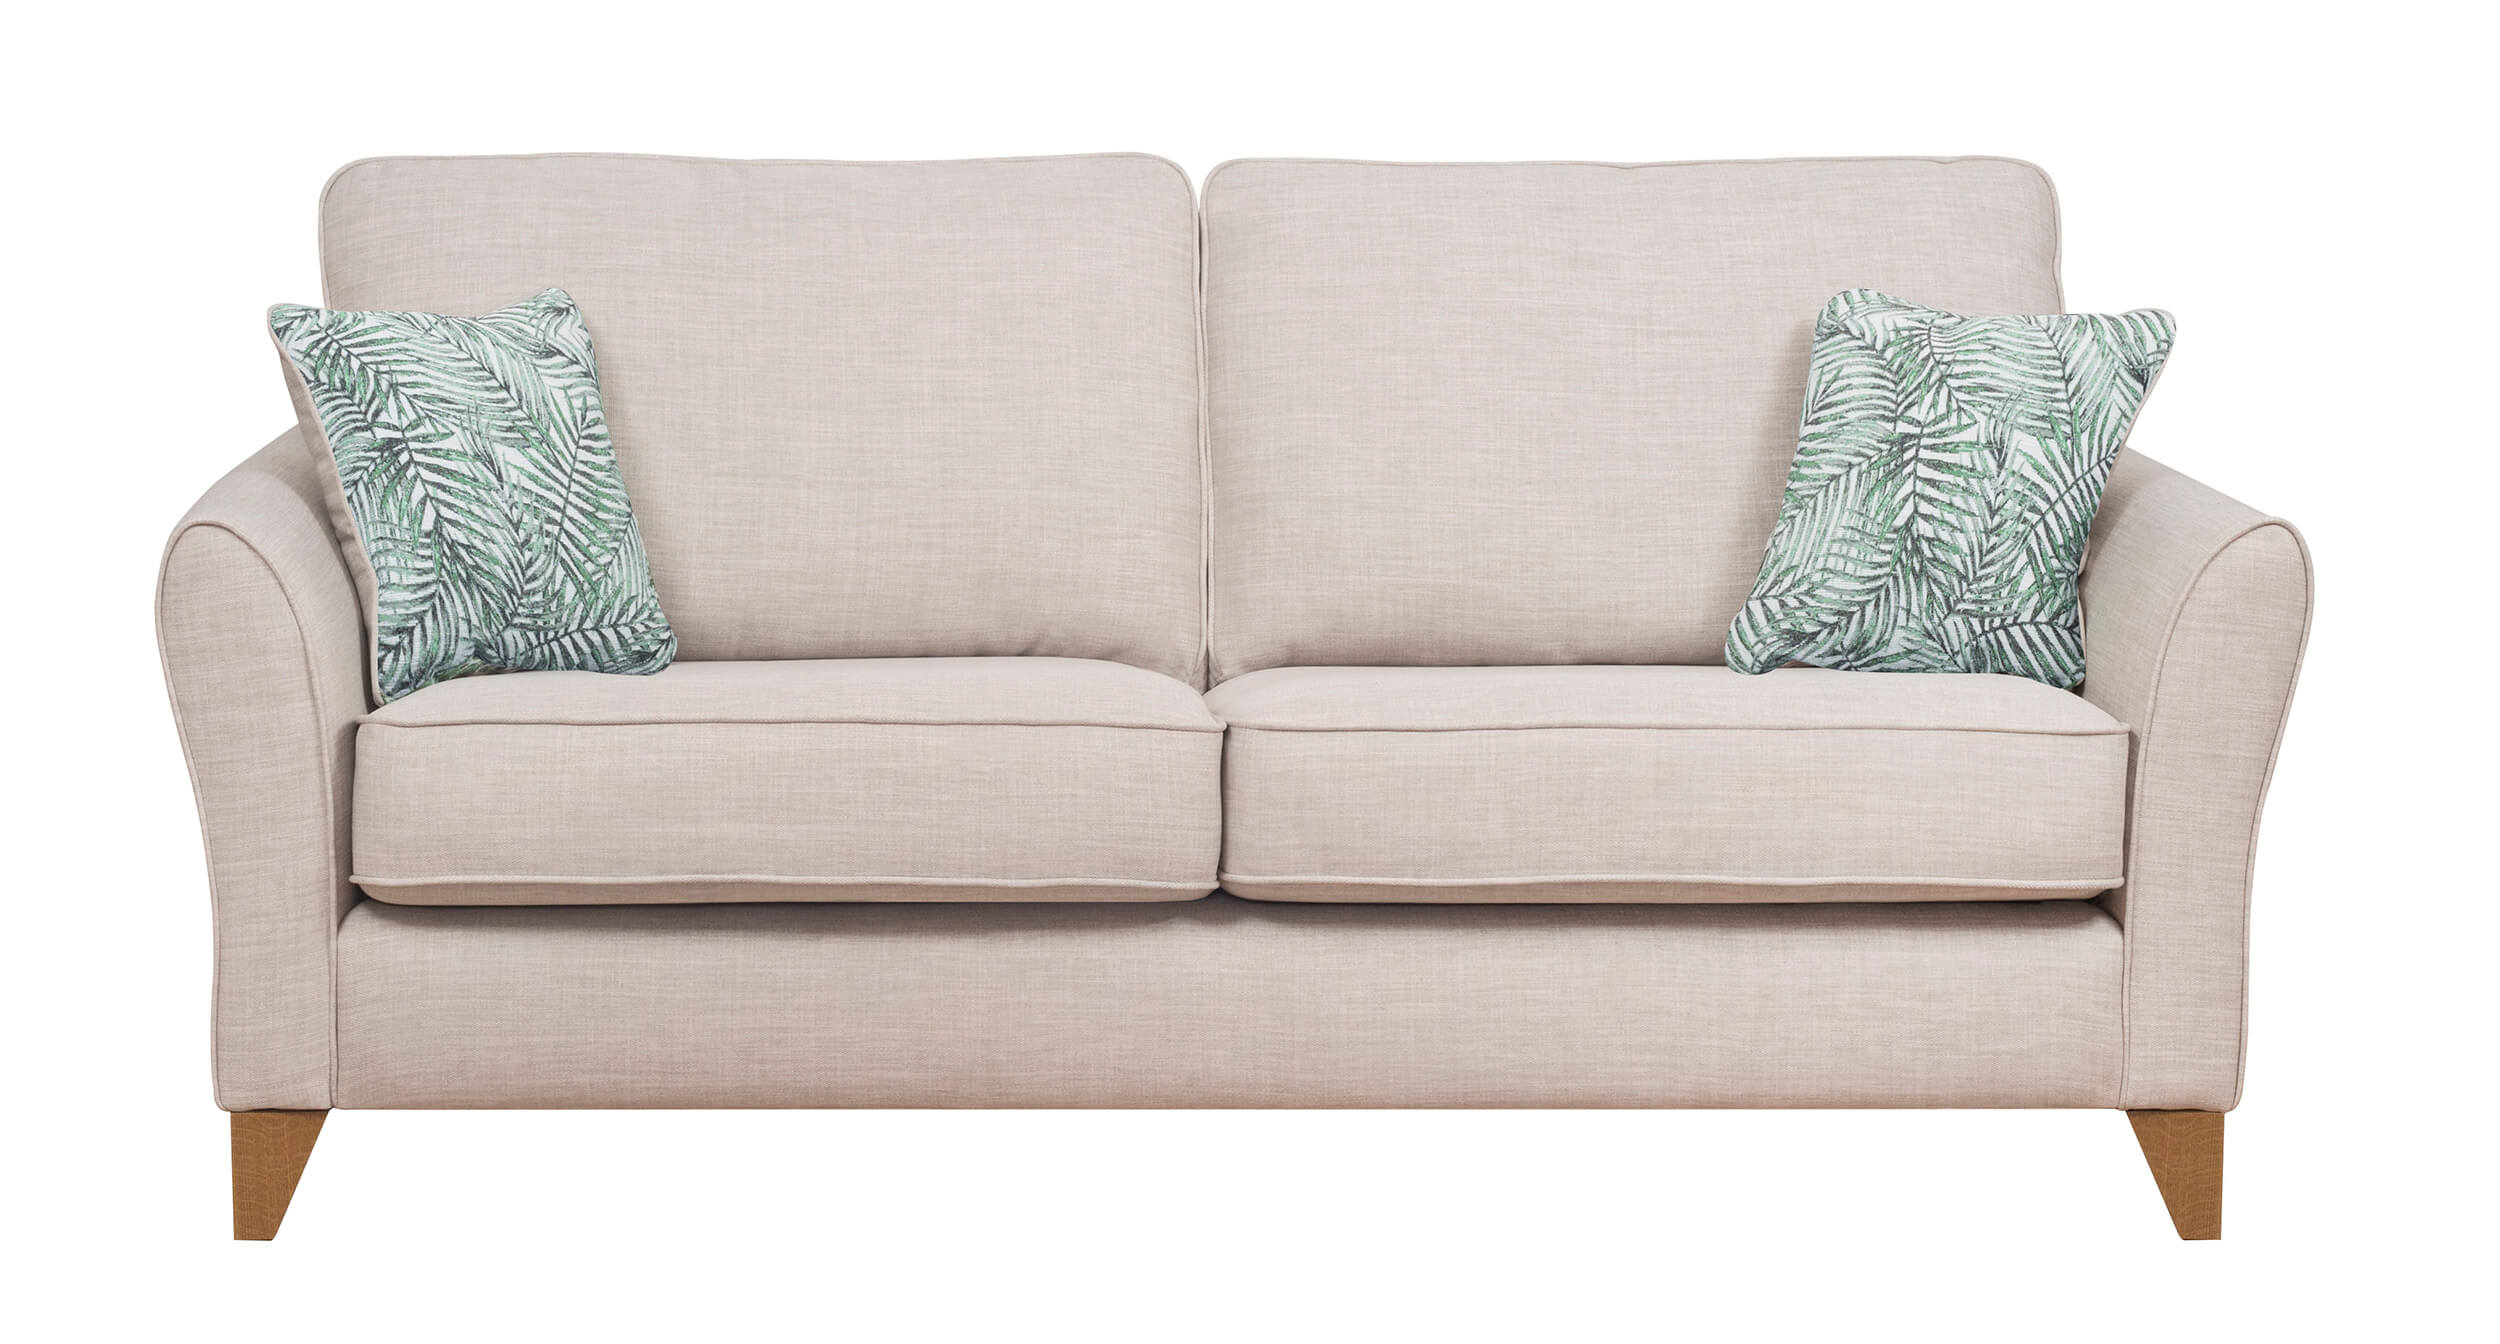 Showing image for Springfield 2-seater sofa